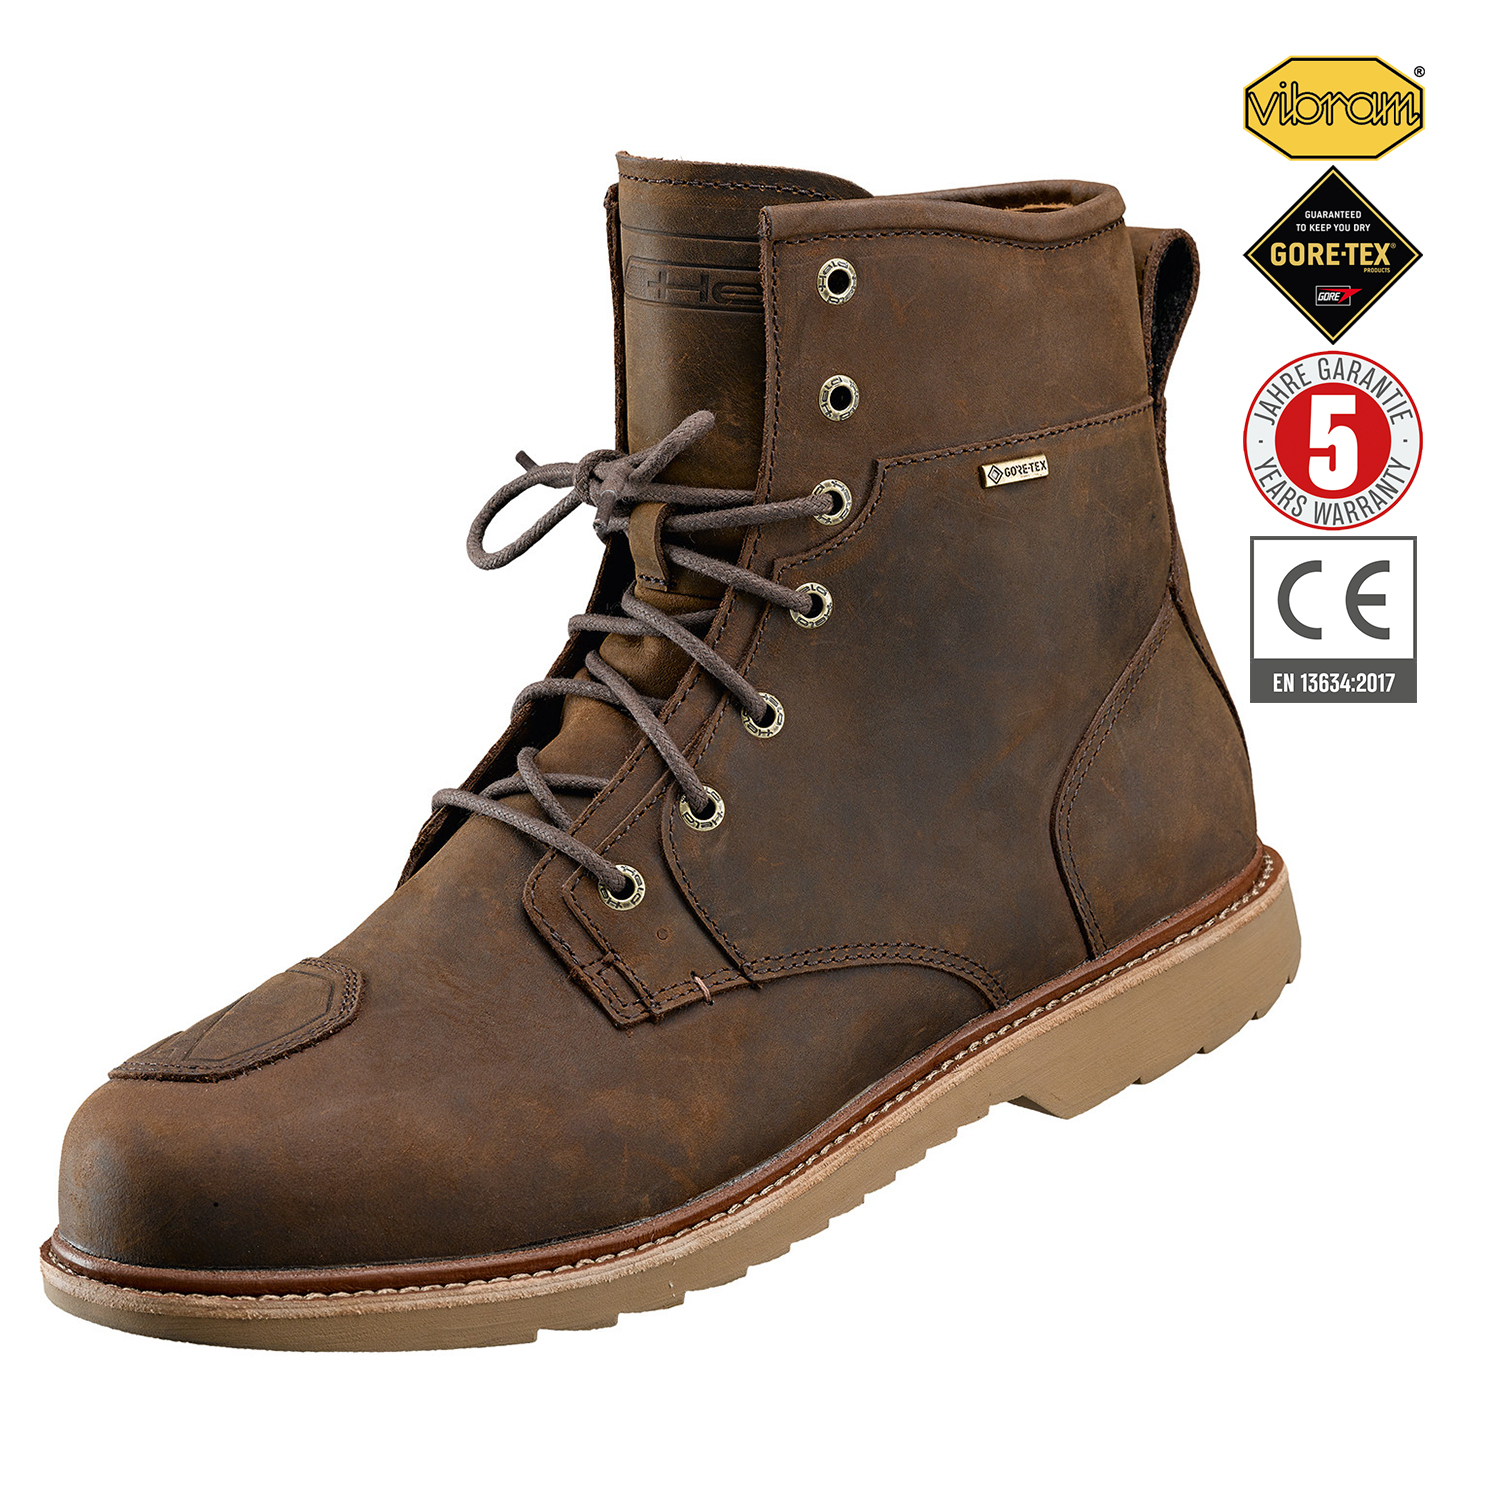 Held Saxton Gore-Tex Boots Brown - Available in Various Sizes